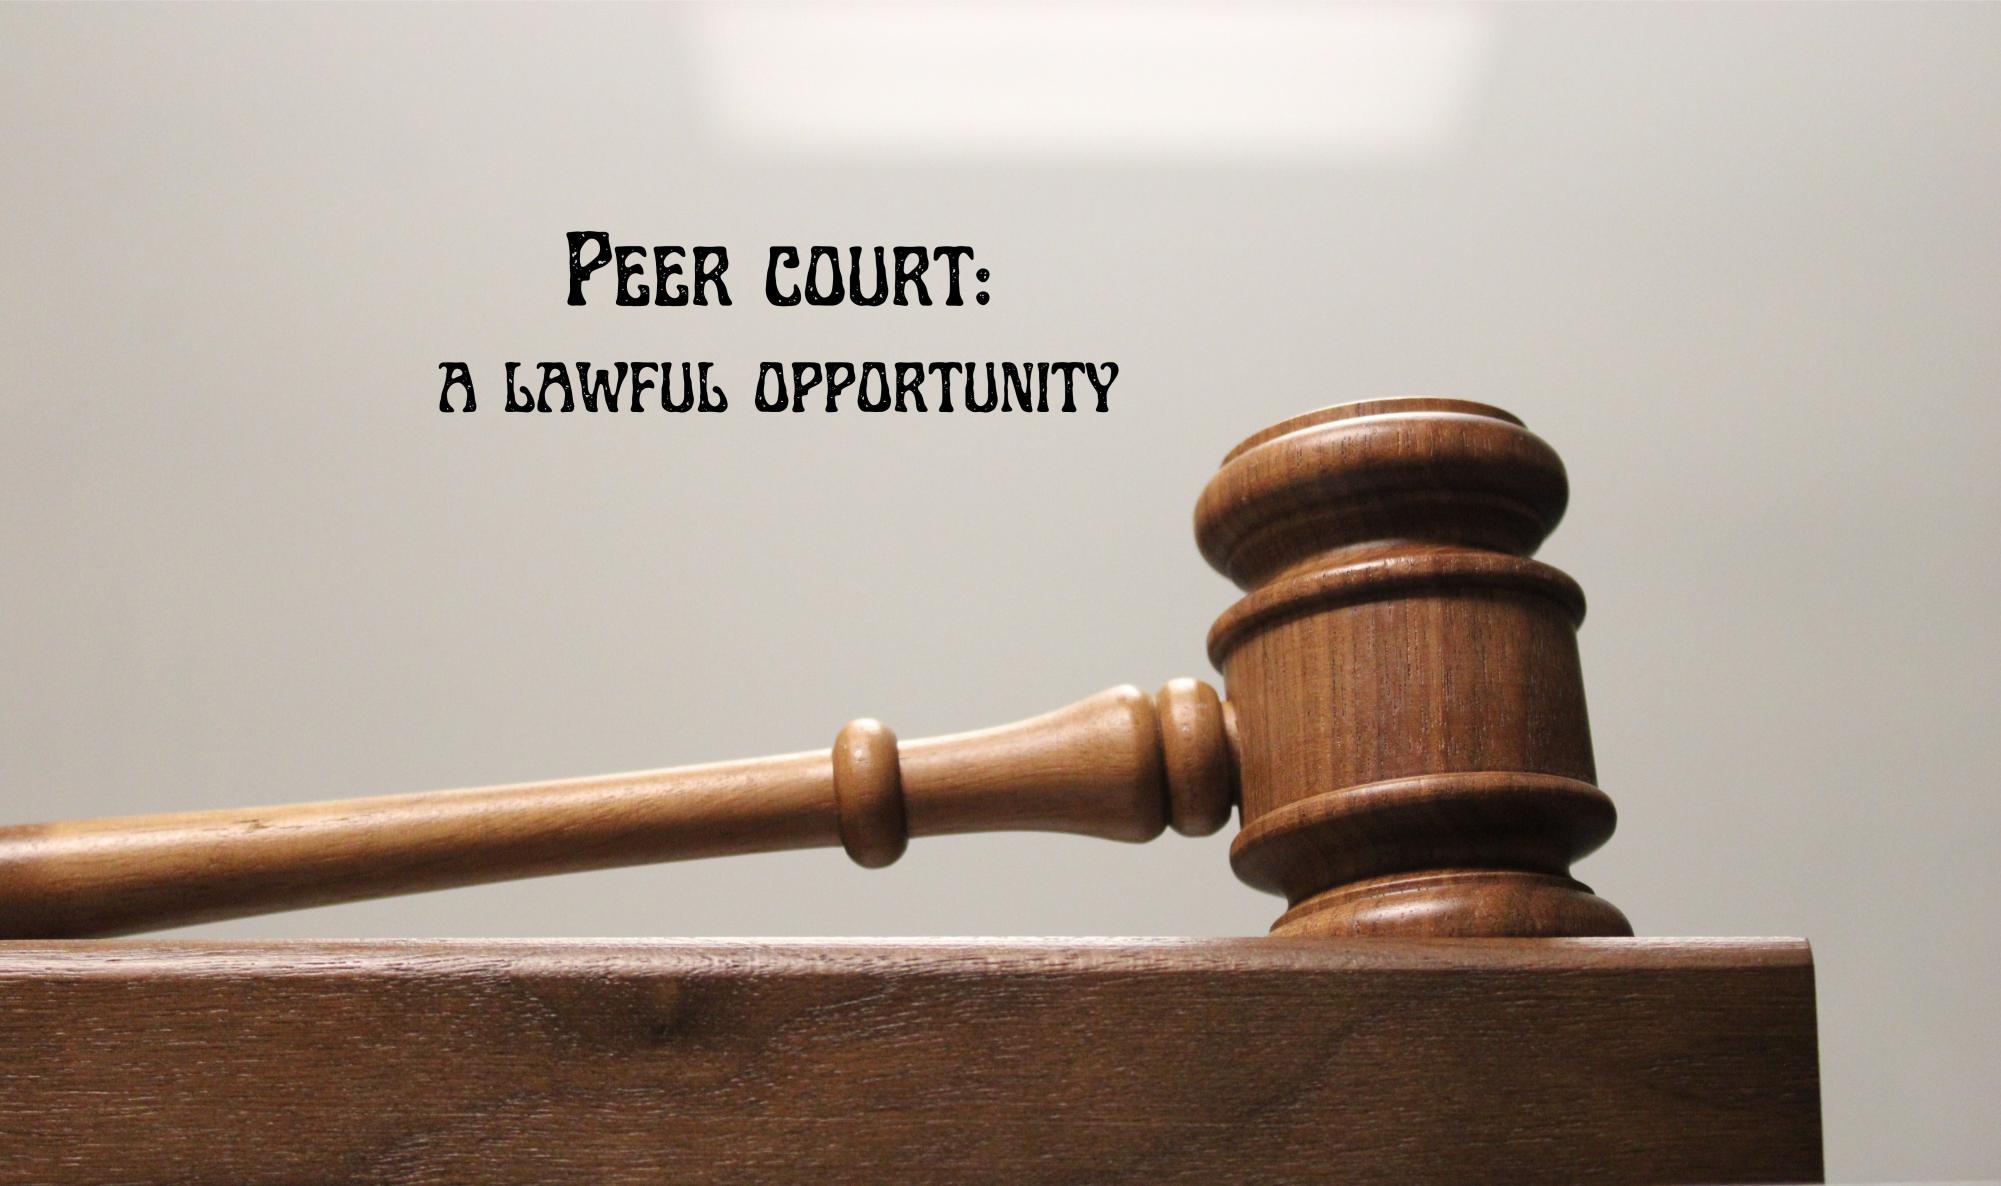 As students look to participate in extracurriculars and make decisions regarding their future, they feel overwhelmed by the multitude of options. For students interested in law, however, one Cobb County program takes the cake. Peer court provides an opportunity for students to work on real juvenile criminal cases and acquaint themselves with the legal system.
